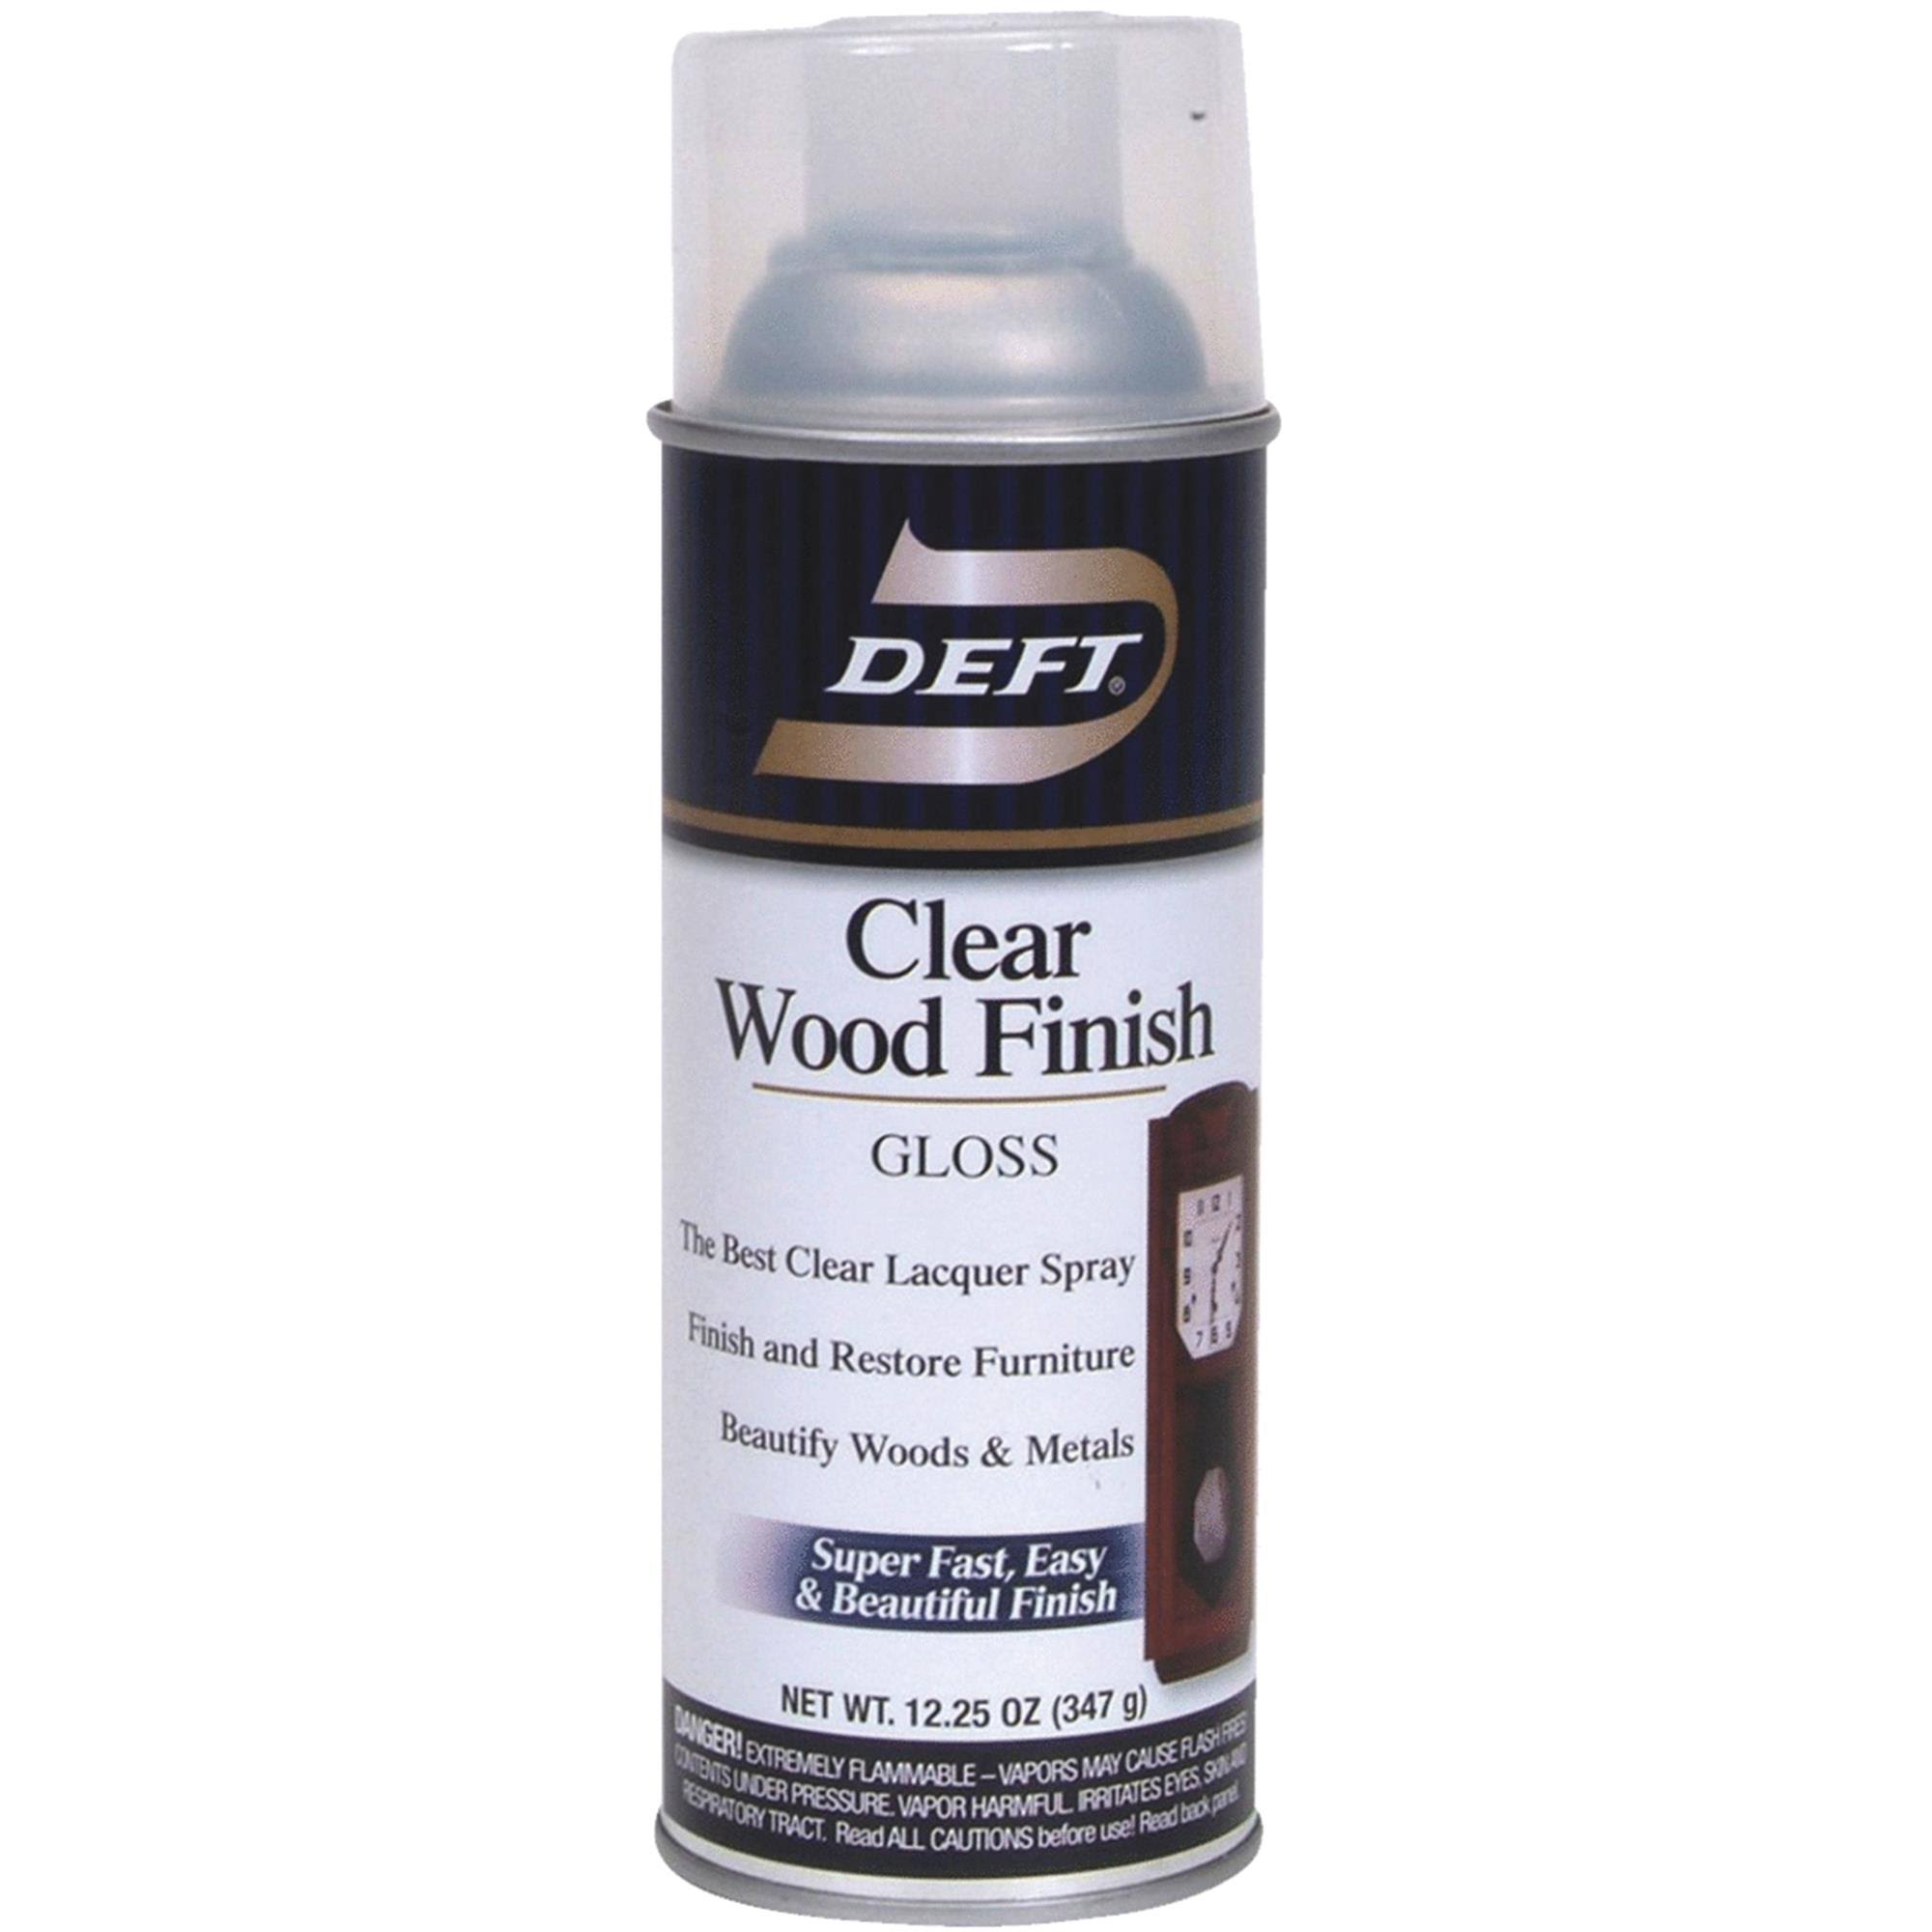 Deft Clear Lacquer Wood Finish Gloss - 12.25oz